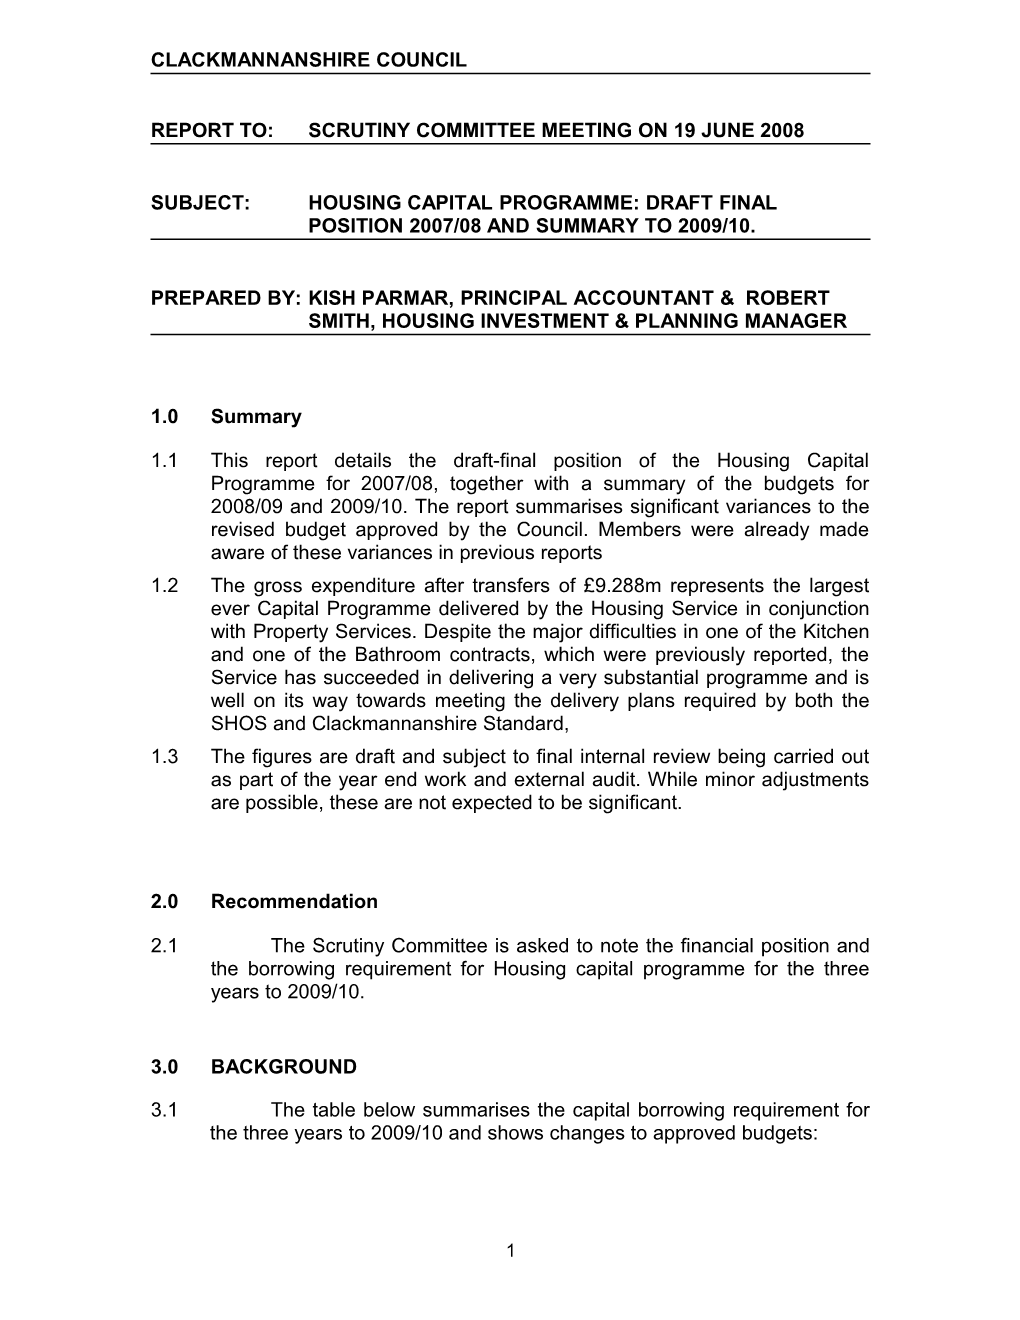 Report To: Scrutiny Committee Meeting on 19 June2008